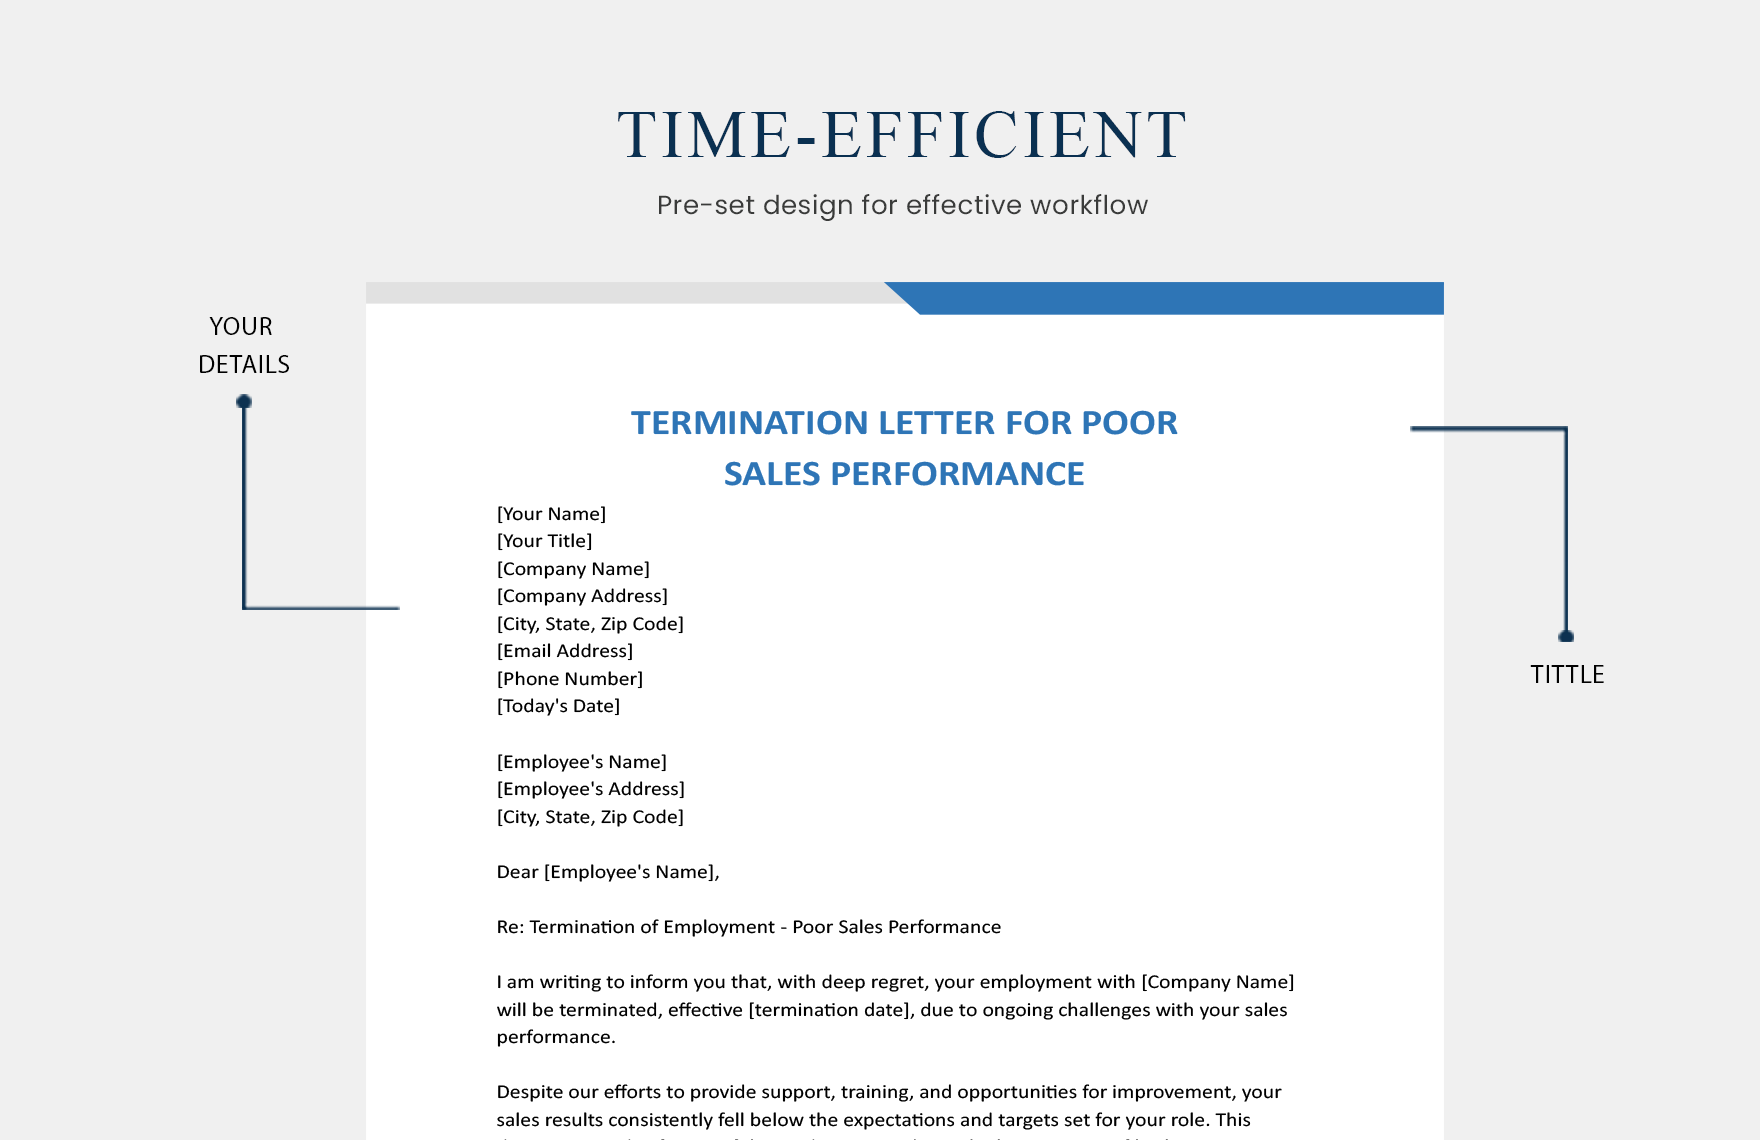 Termination Letter For Poor Sales Performance